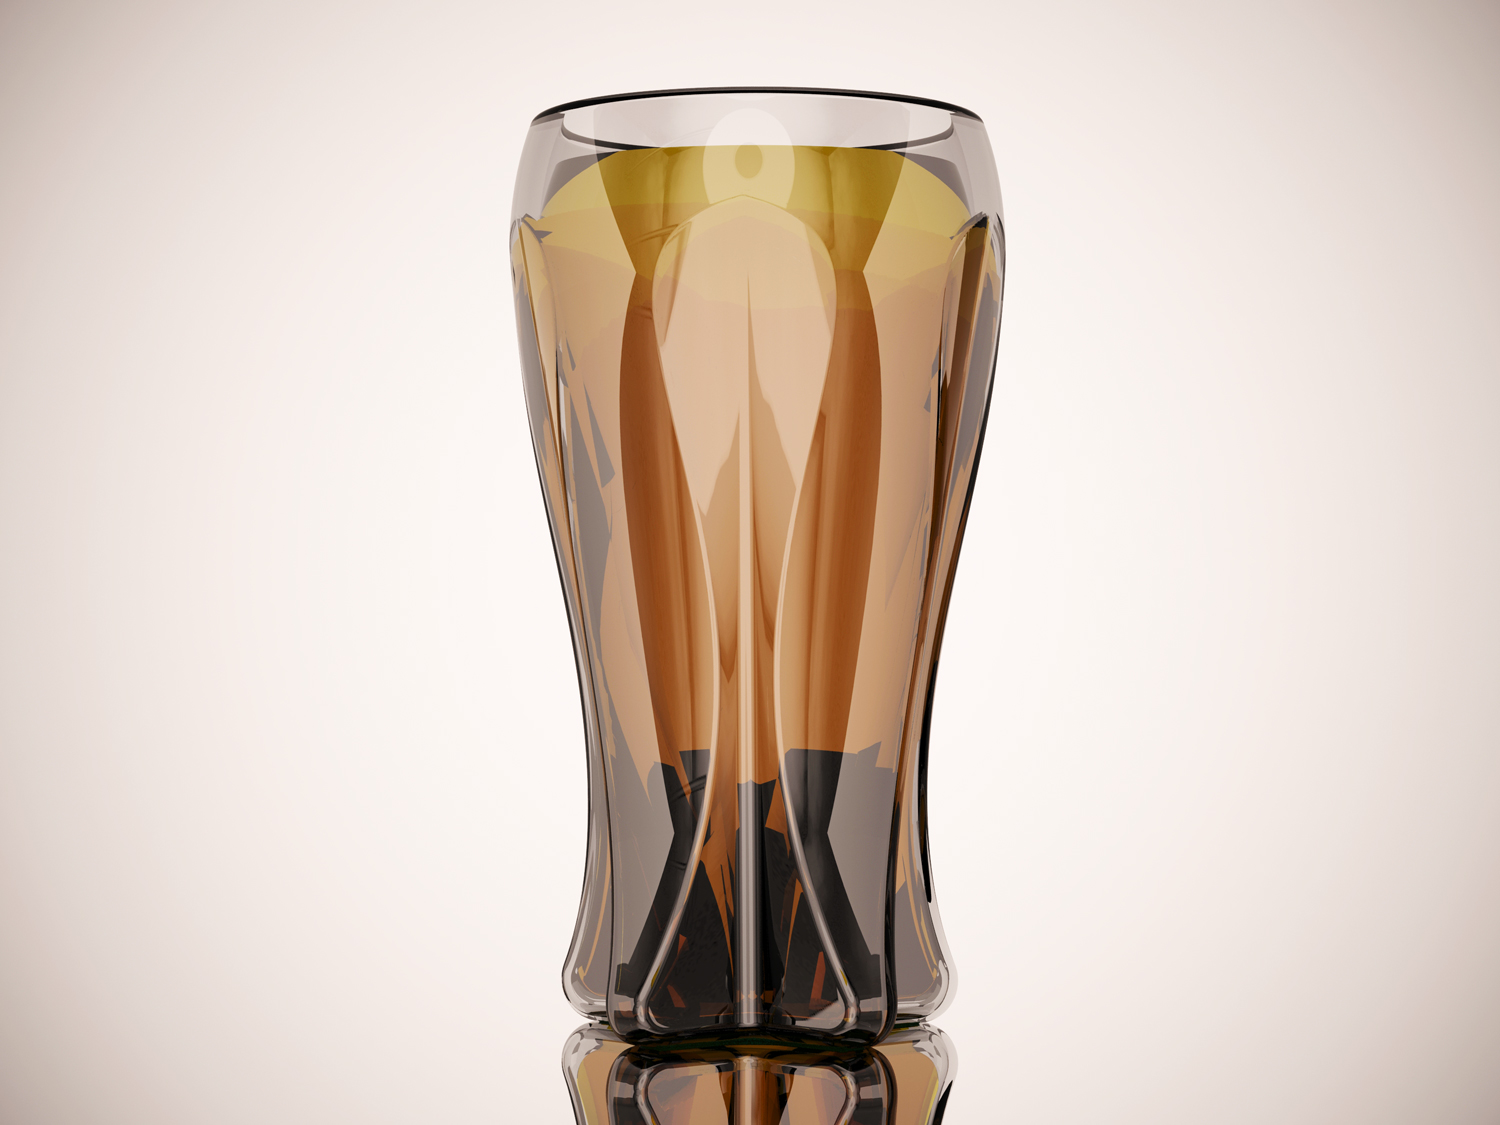 Final closeup image of one beer glass.